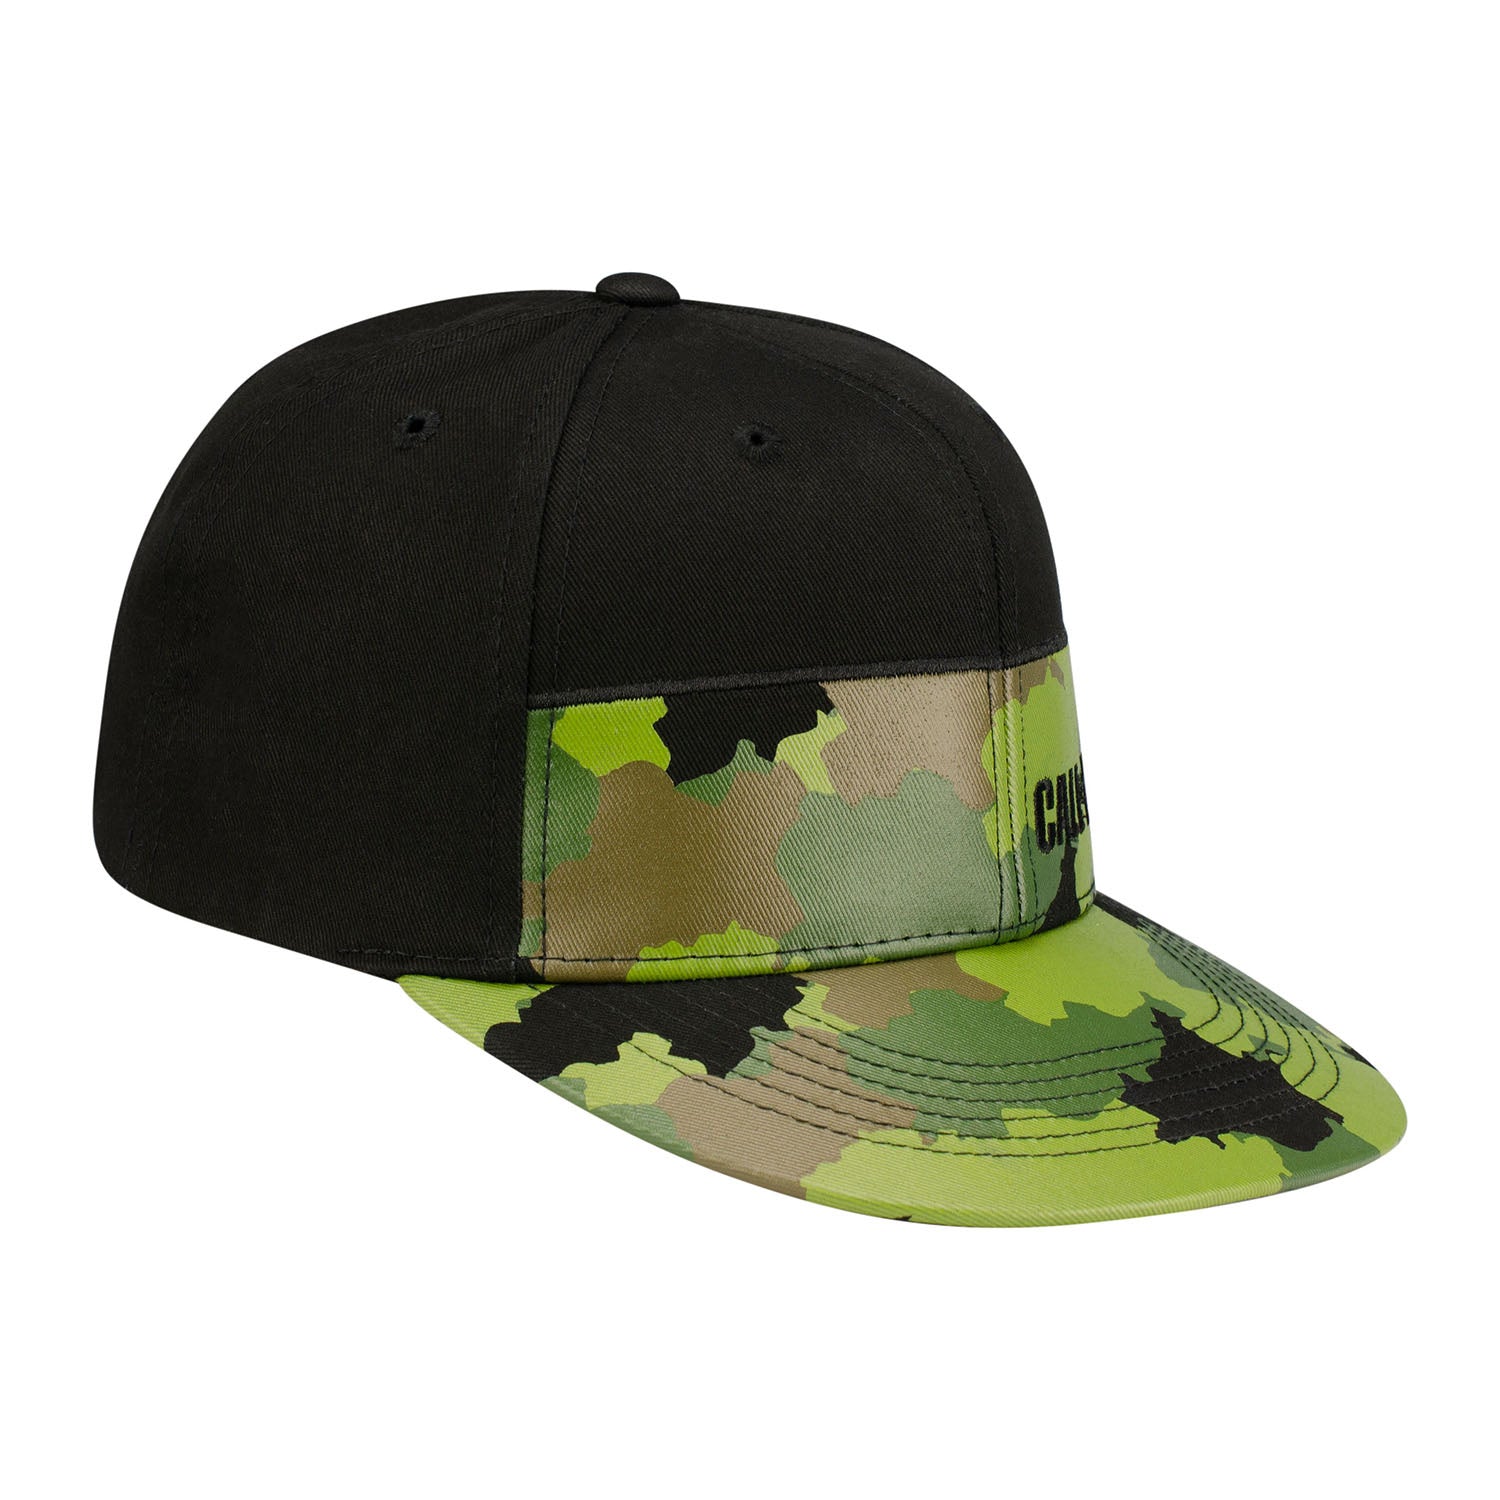 Call of Duty Camouflage Logo Snapback Hat -Right View